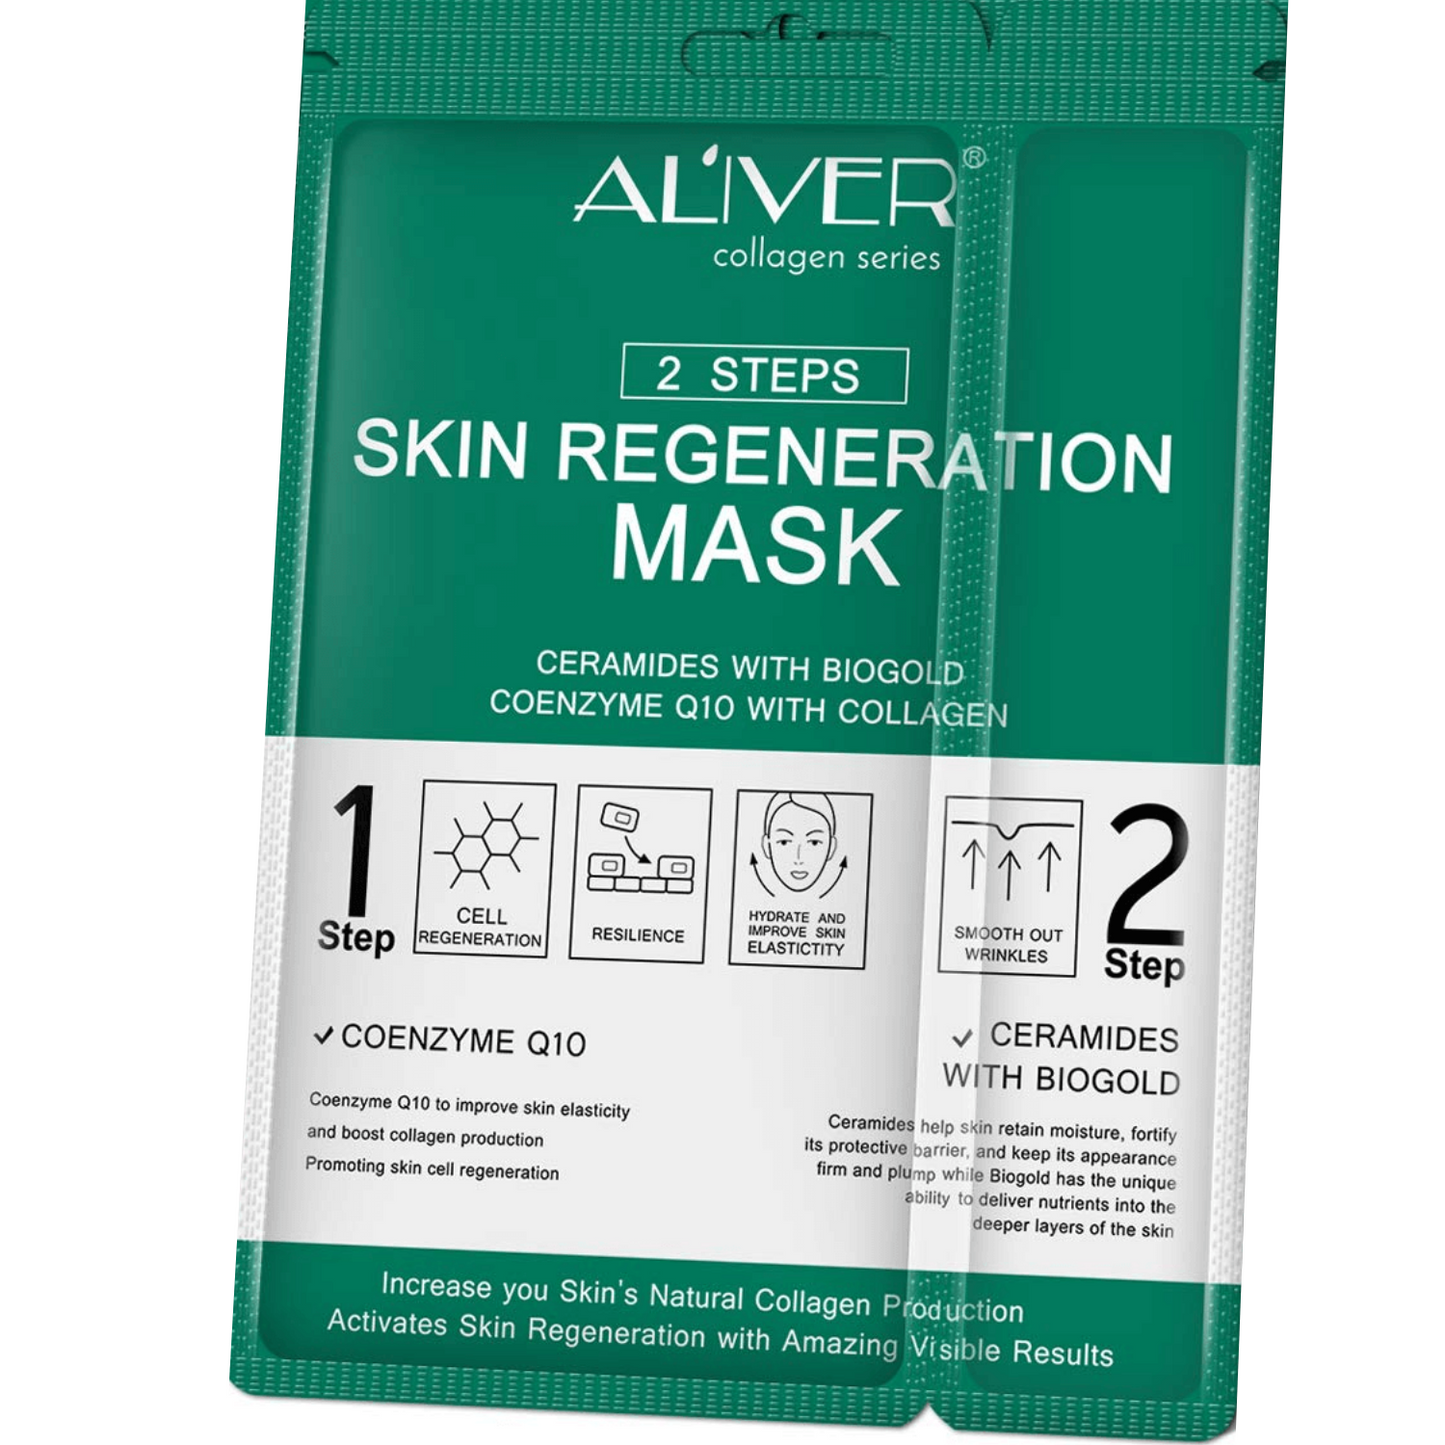 Aliver Skin Regeneration Brightening Anti-Aging Anti-Wrinkle Face Mask with Ceramides, Biogold, Co-Enzyme Q10 and Collagen - Pack of 5 Masks